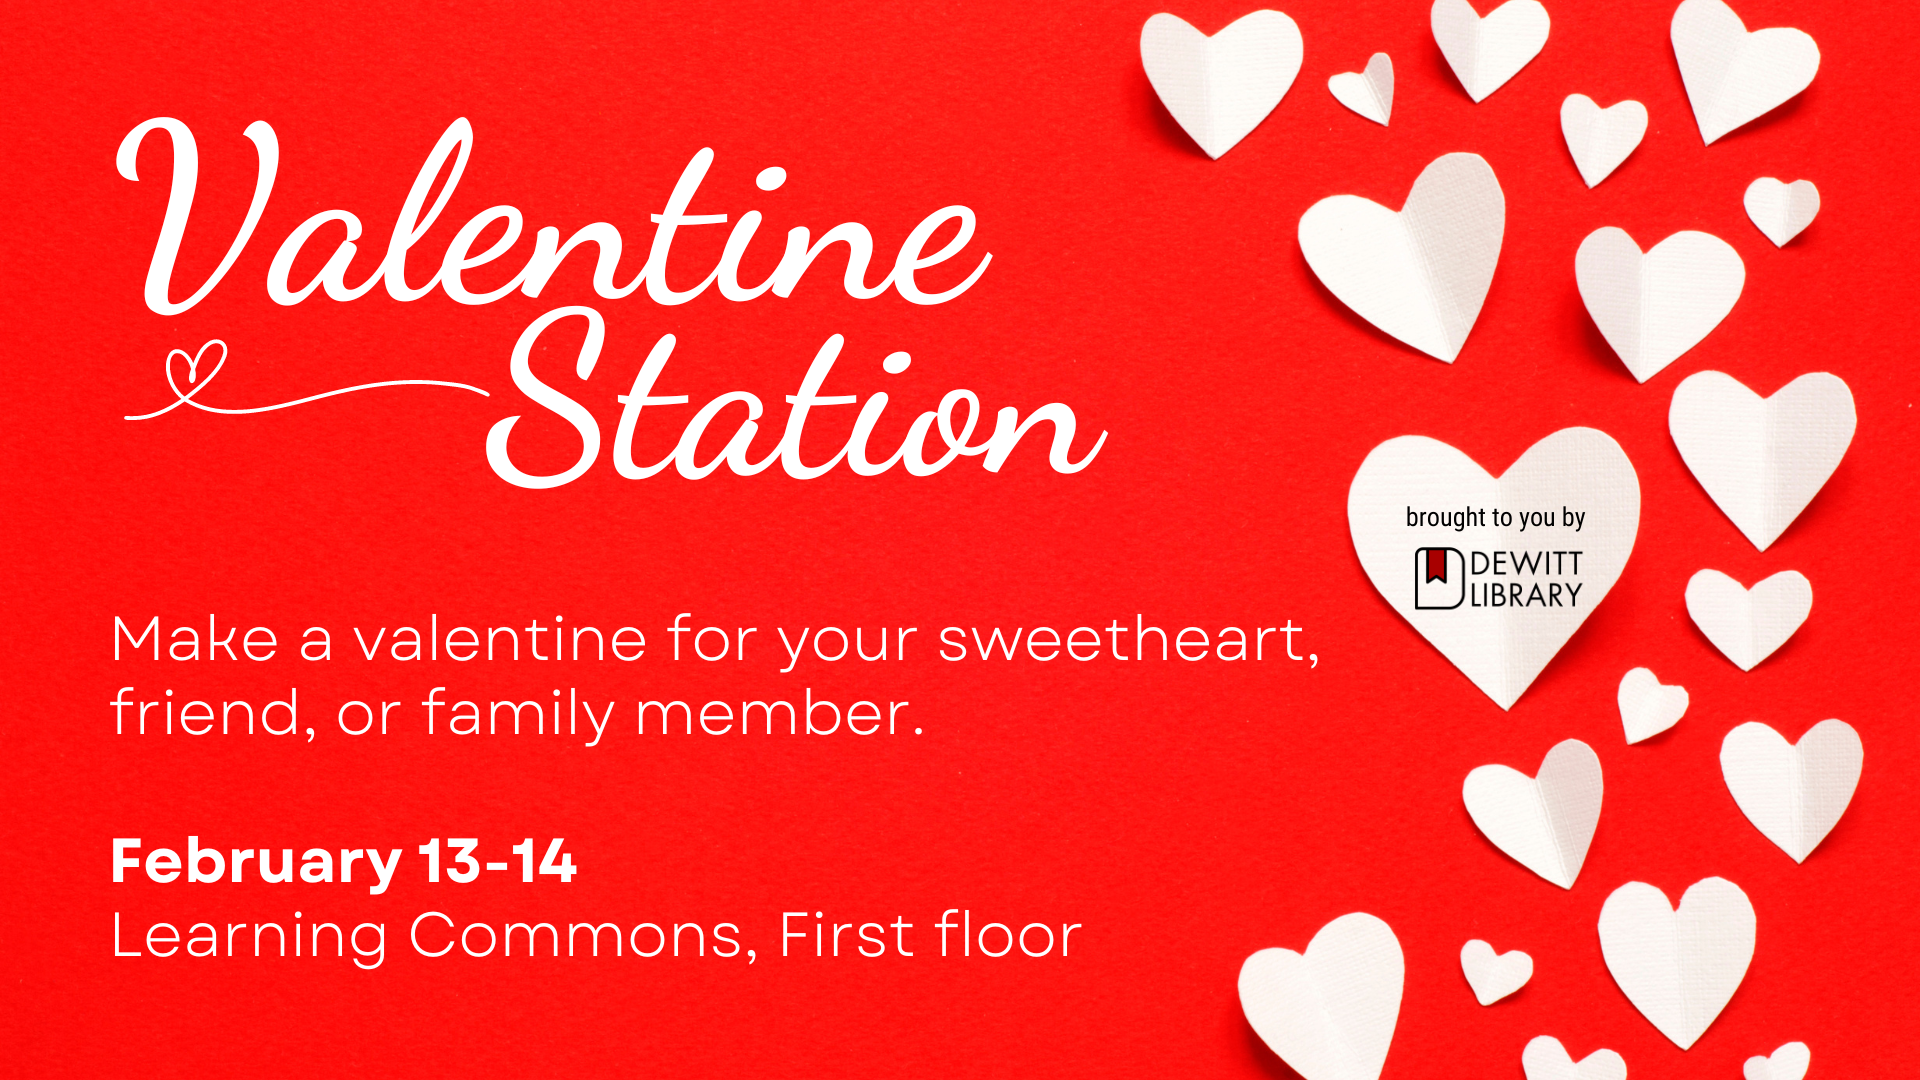 Valentine Station, February 13-14, Learning Commons, First floor